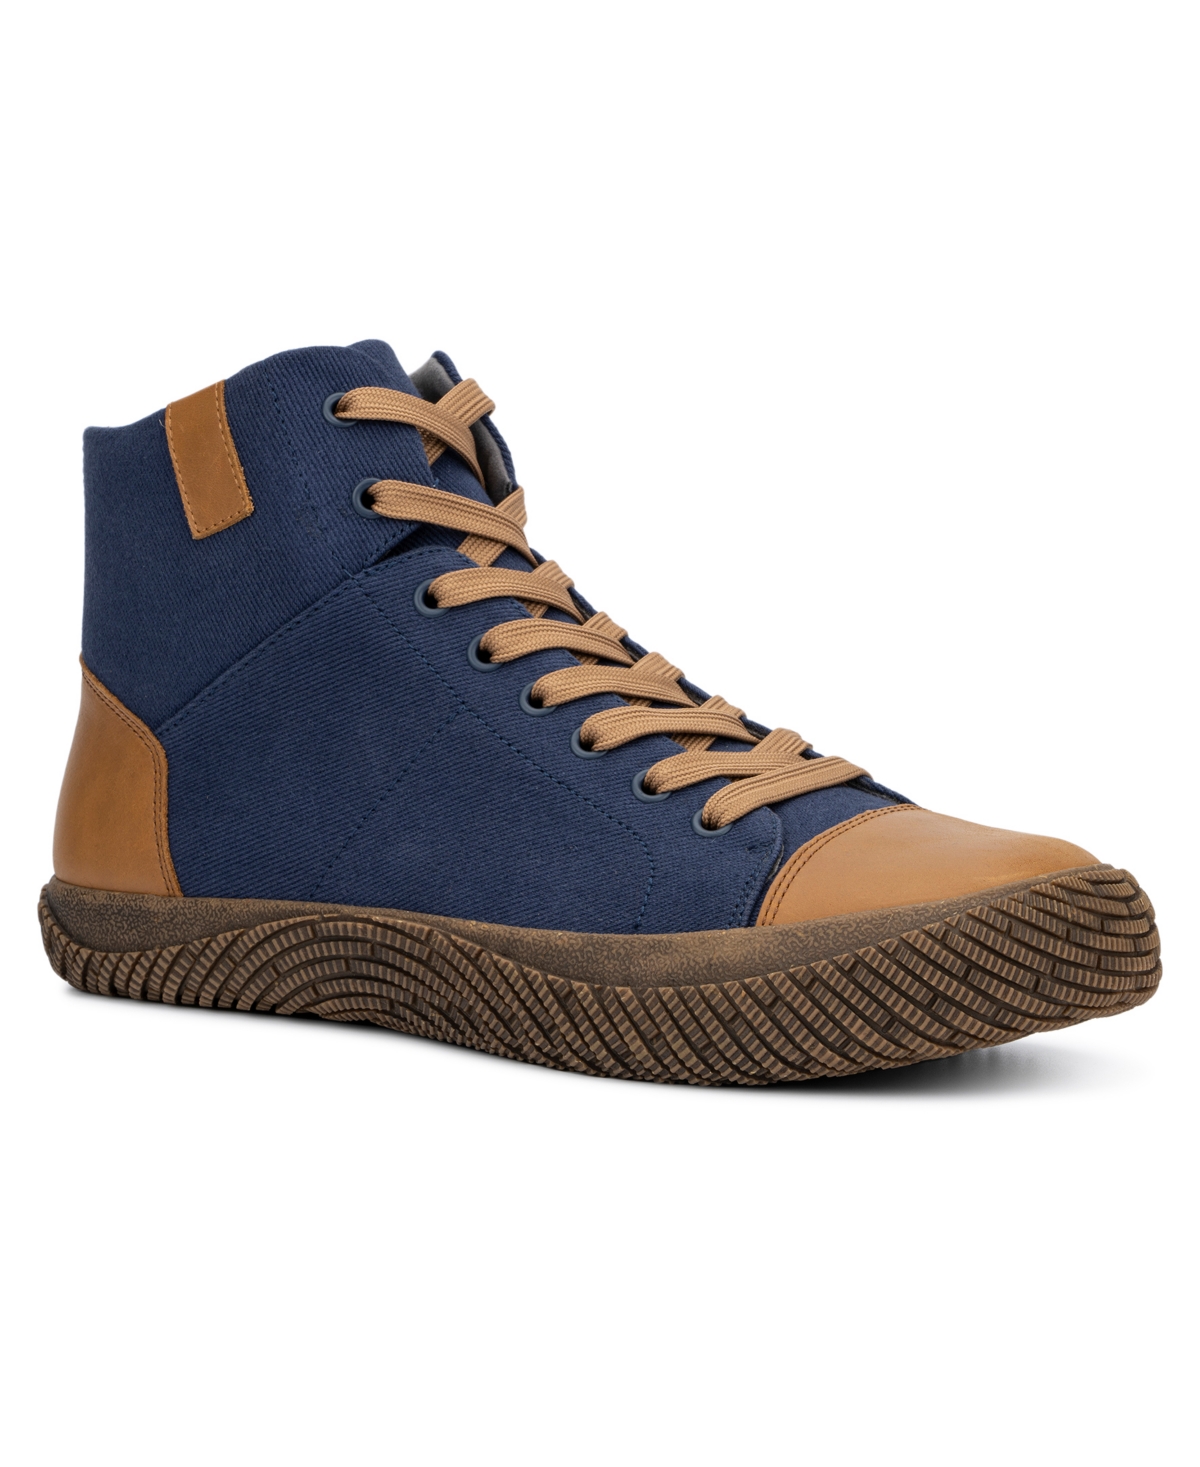 Hybrid Green Label Men's The Wolsey 2.0 High Top Sneakers Men's Shoes